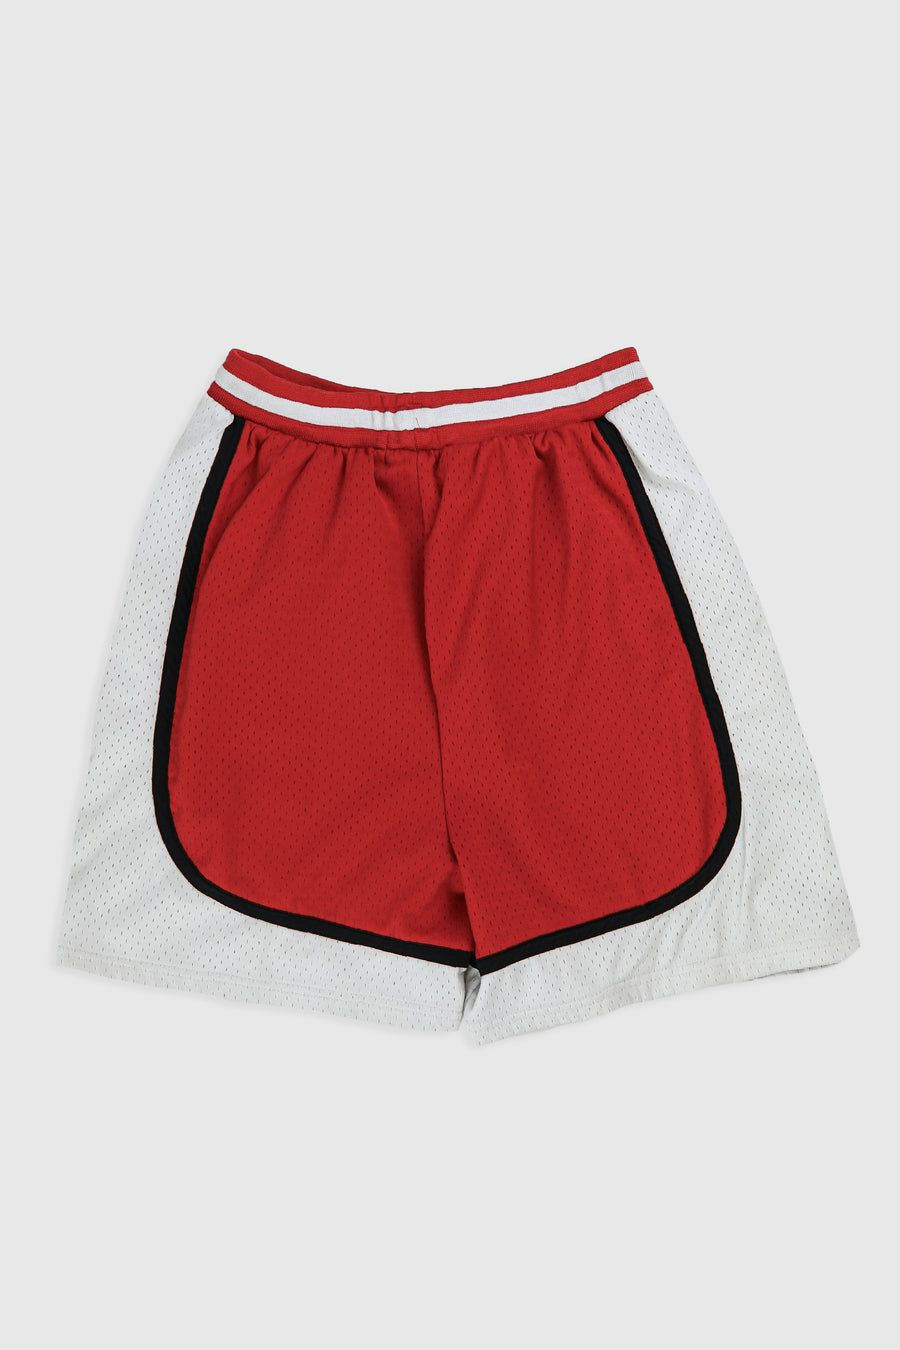 Vintage AND1 Shorts